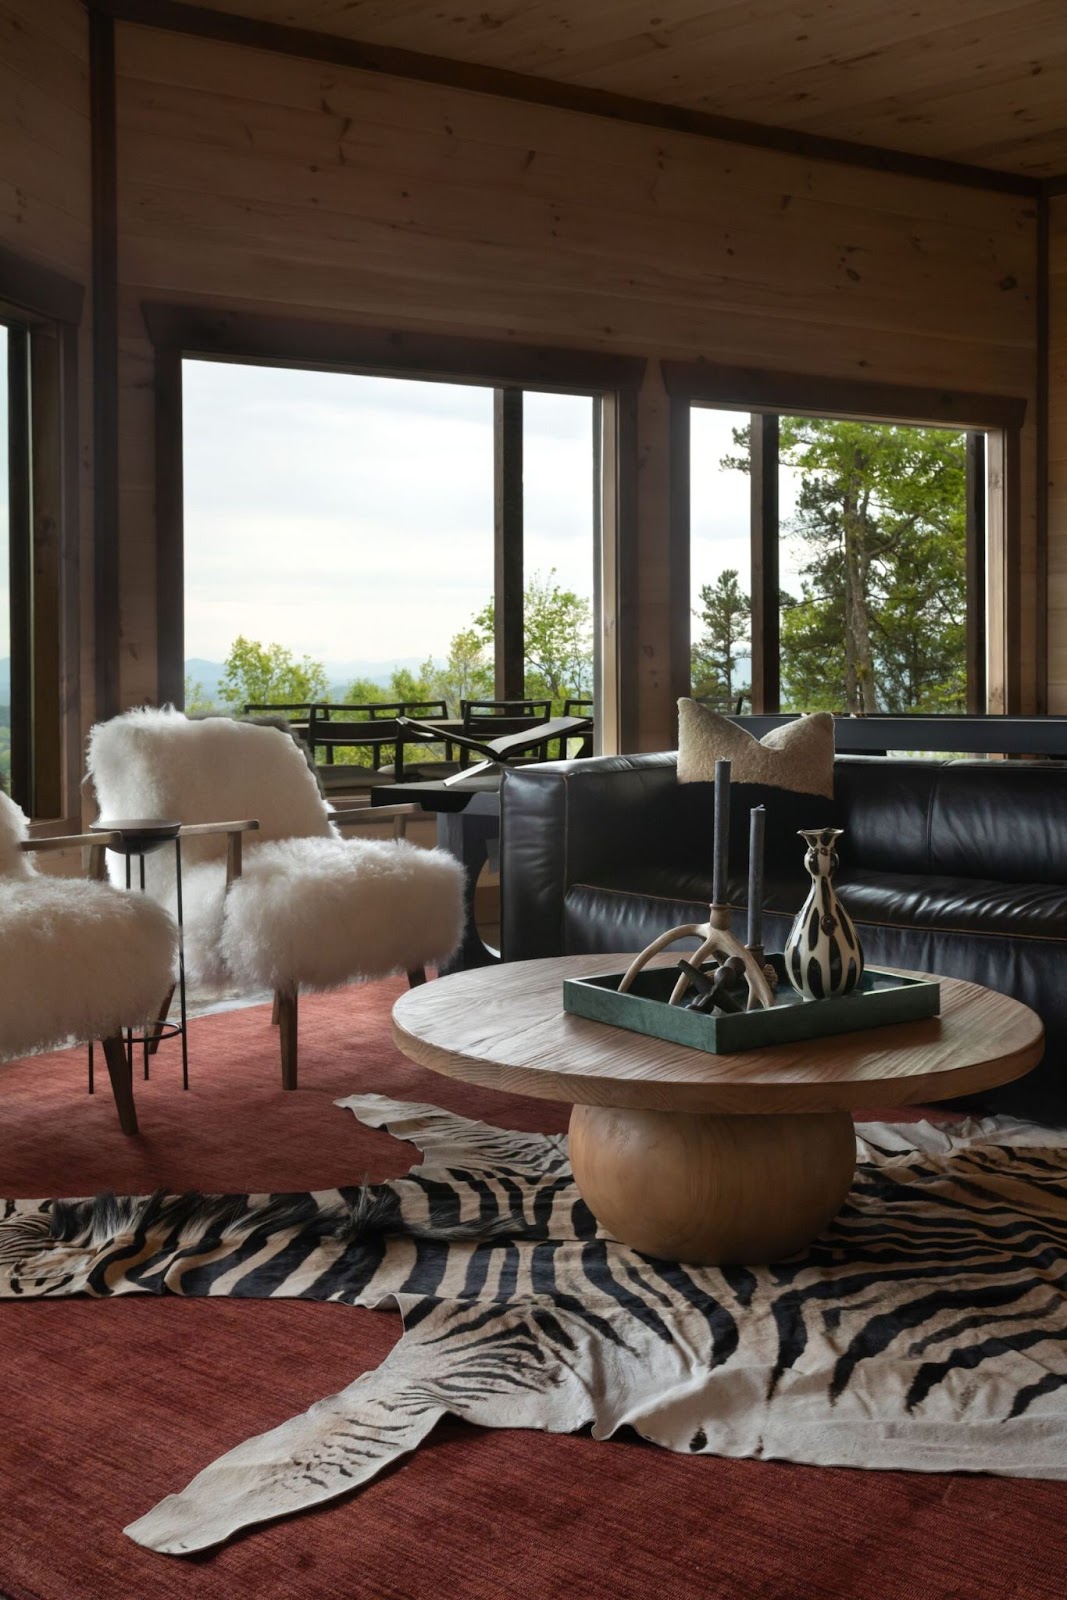 A living room with large windows showcasing a scenic view. The room features a black leather couch, two white fluffy armchairs, a round wooden coffee table, and a zebra print rug. The walls and ceiling are covered in natural wood paneling, contributing to the rustic feel.